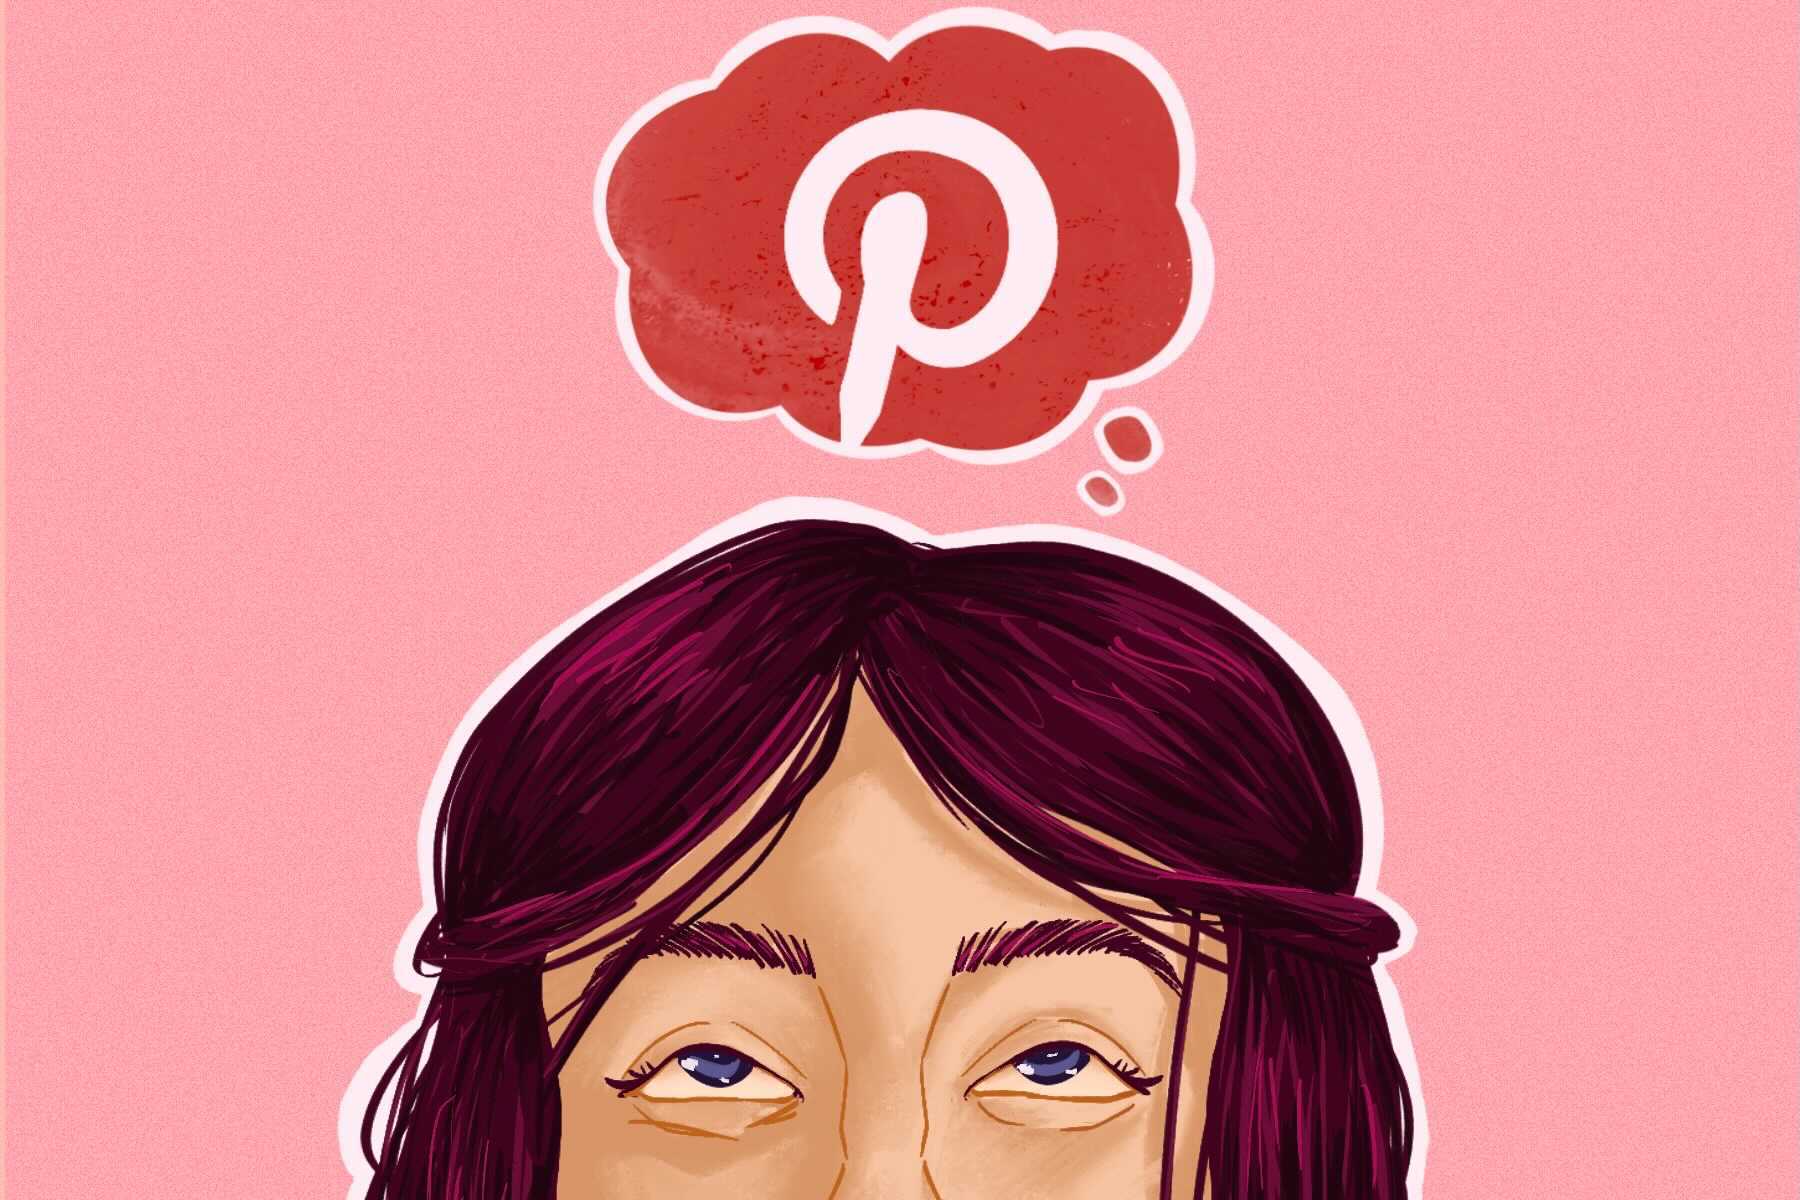 An illustration of a person with the Pinterest logo above their head.